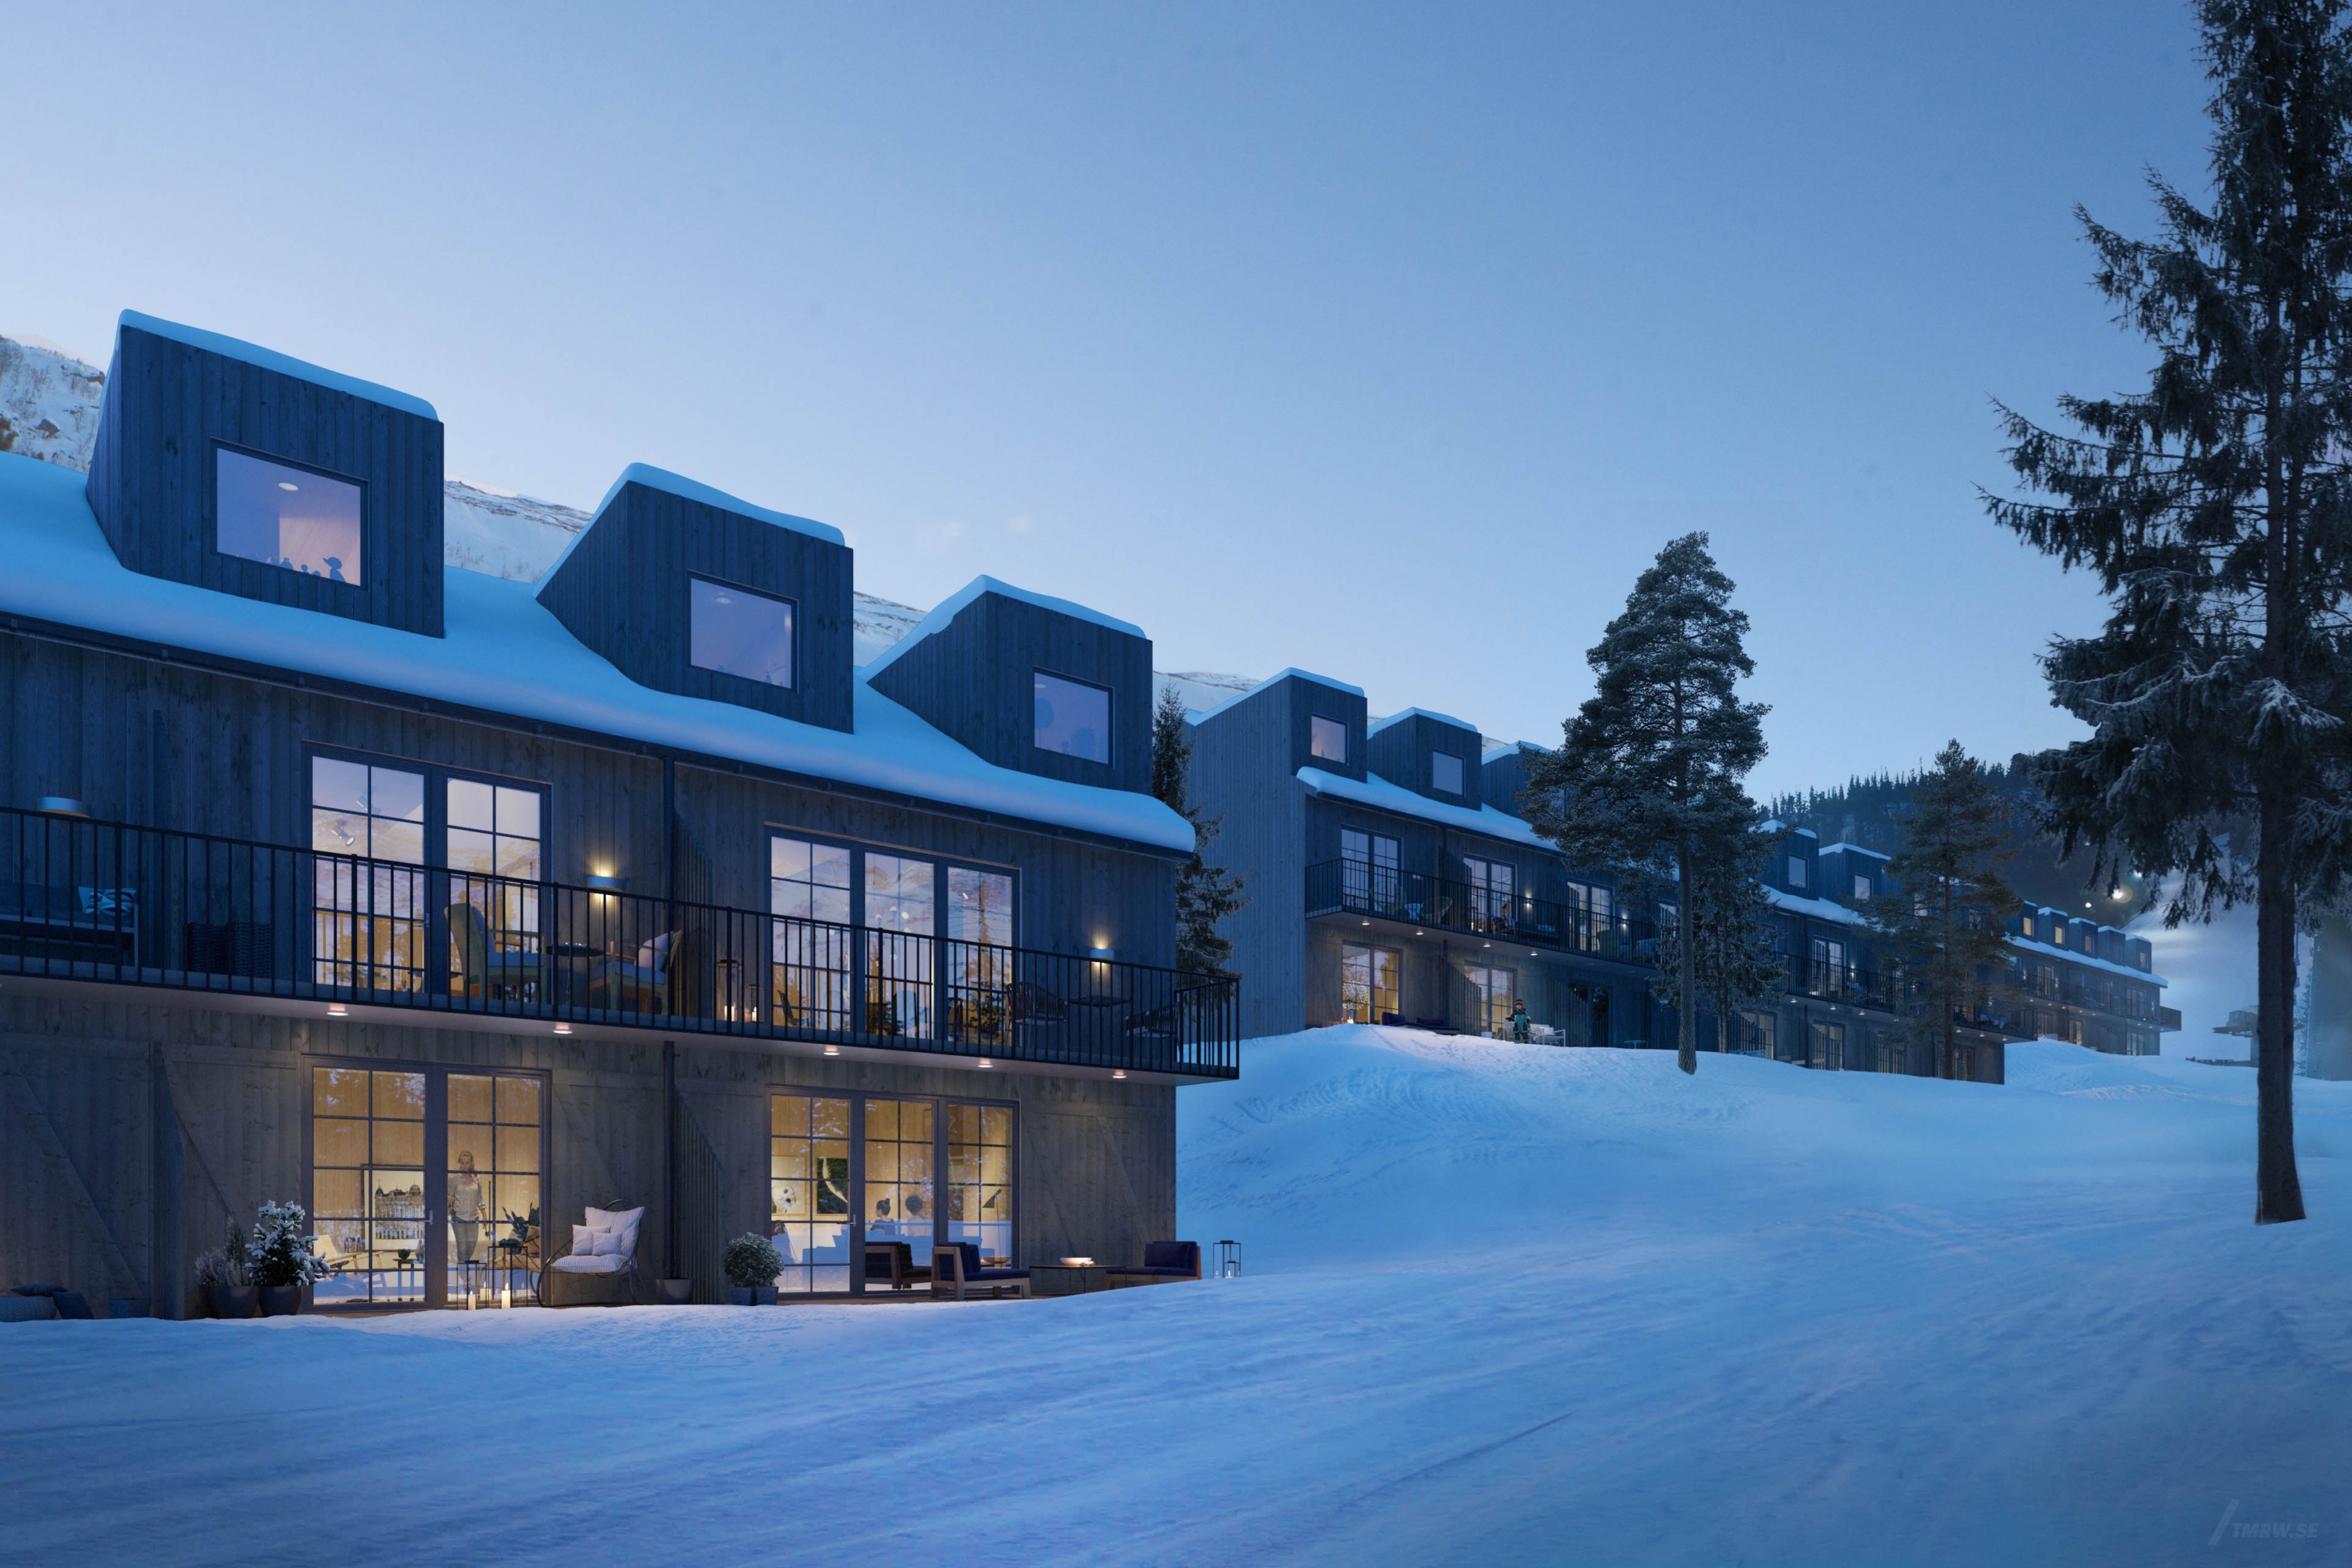 Architectural visualization of Hills365 for Bleck, exterior of residential buildings in dusk, snow landscape